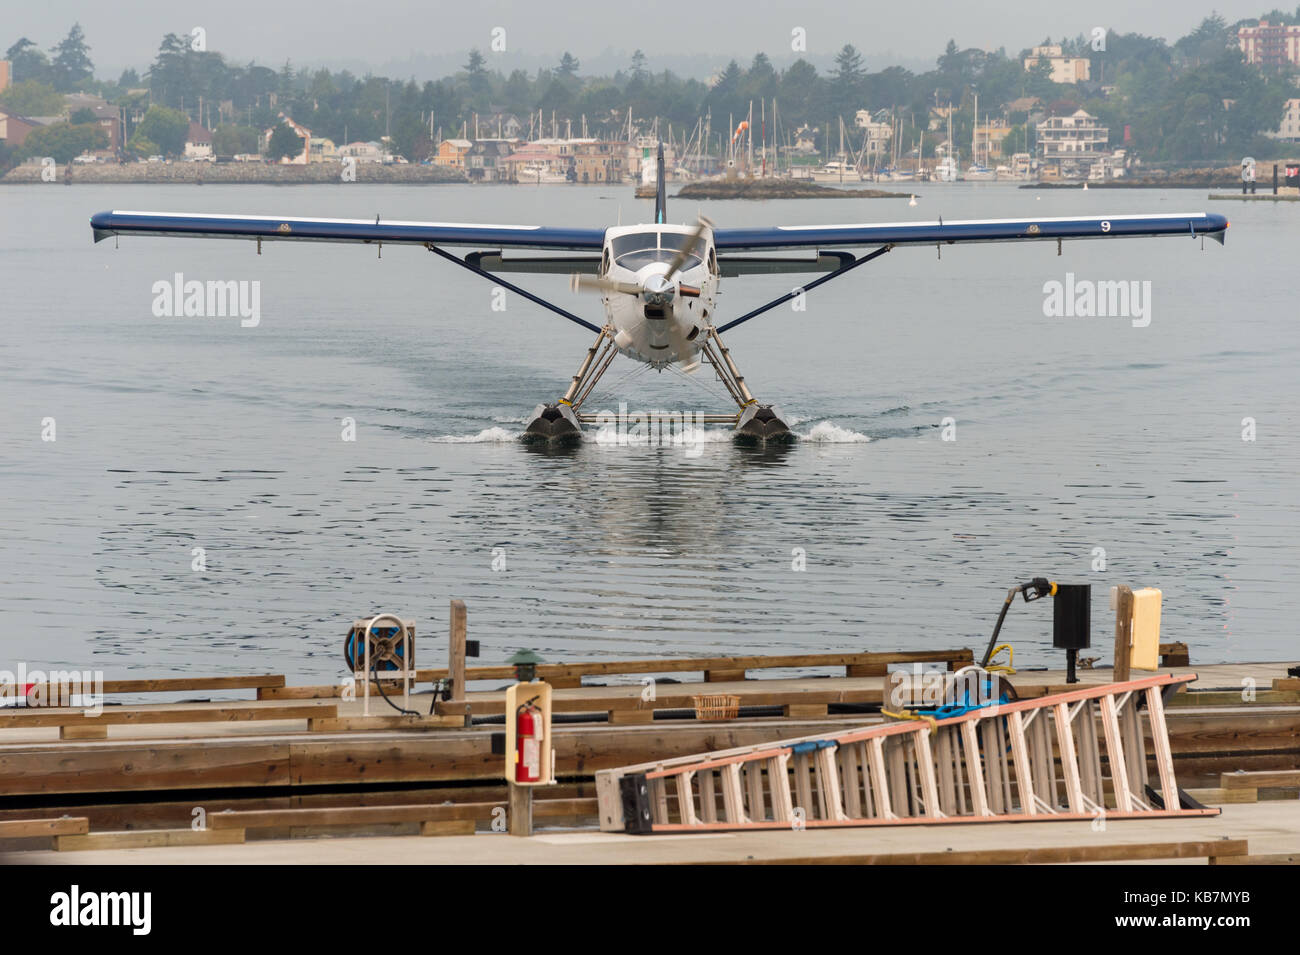 Vancouver, British Columbia, Canada - 7 September 2017: Seaplane arriving at Victoria Harbour Airport Stock Photo